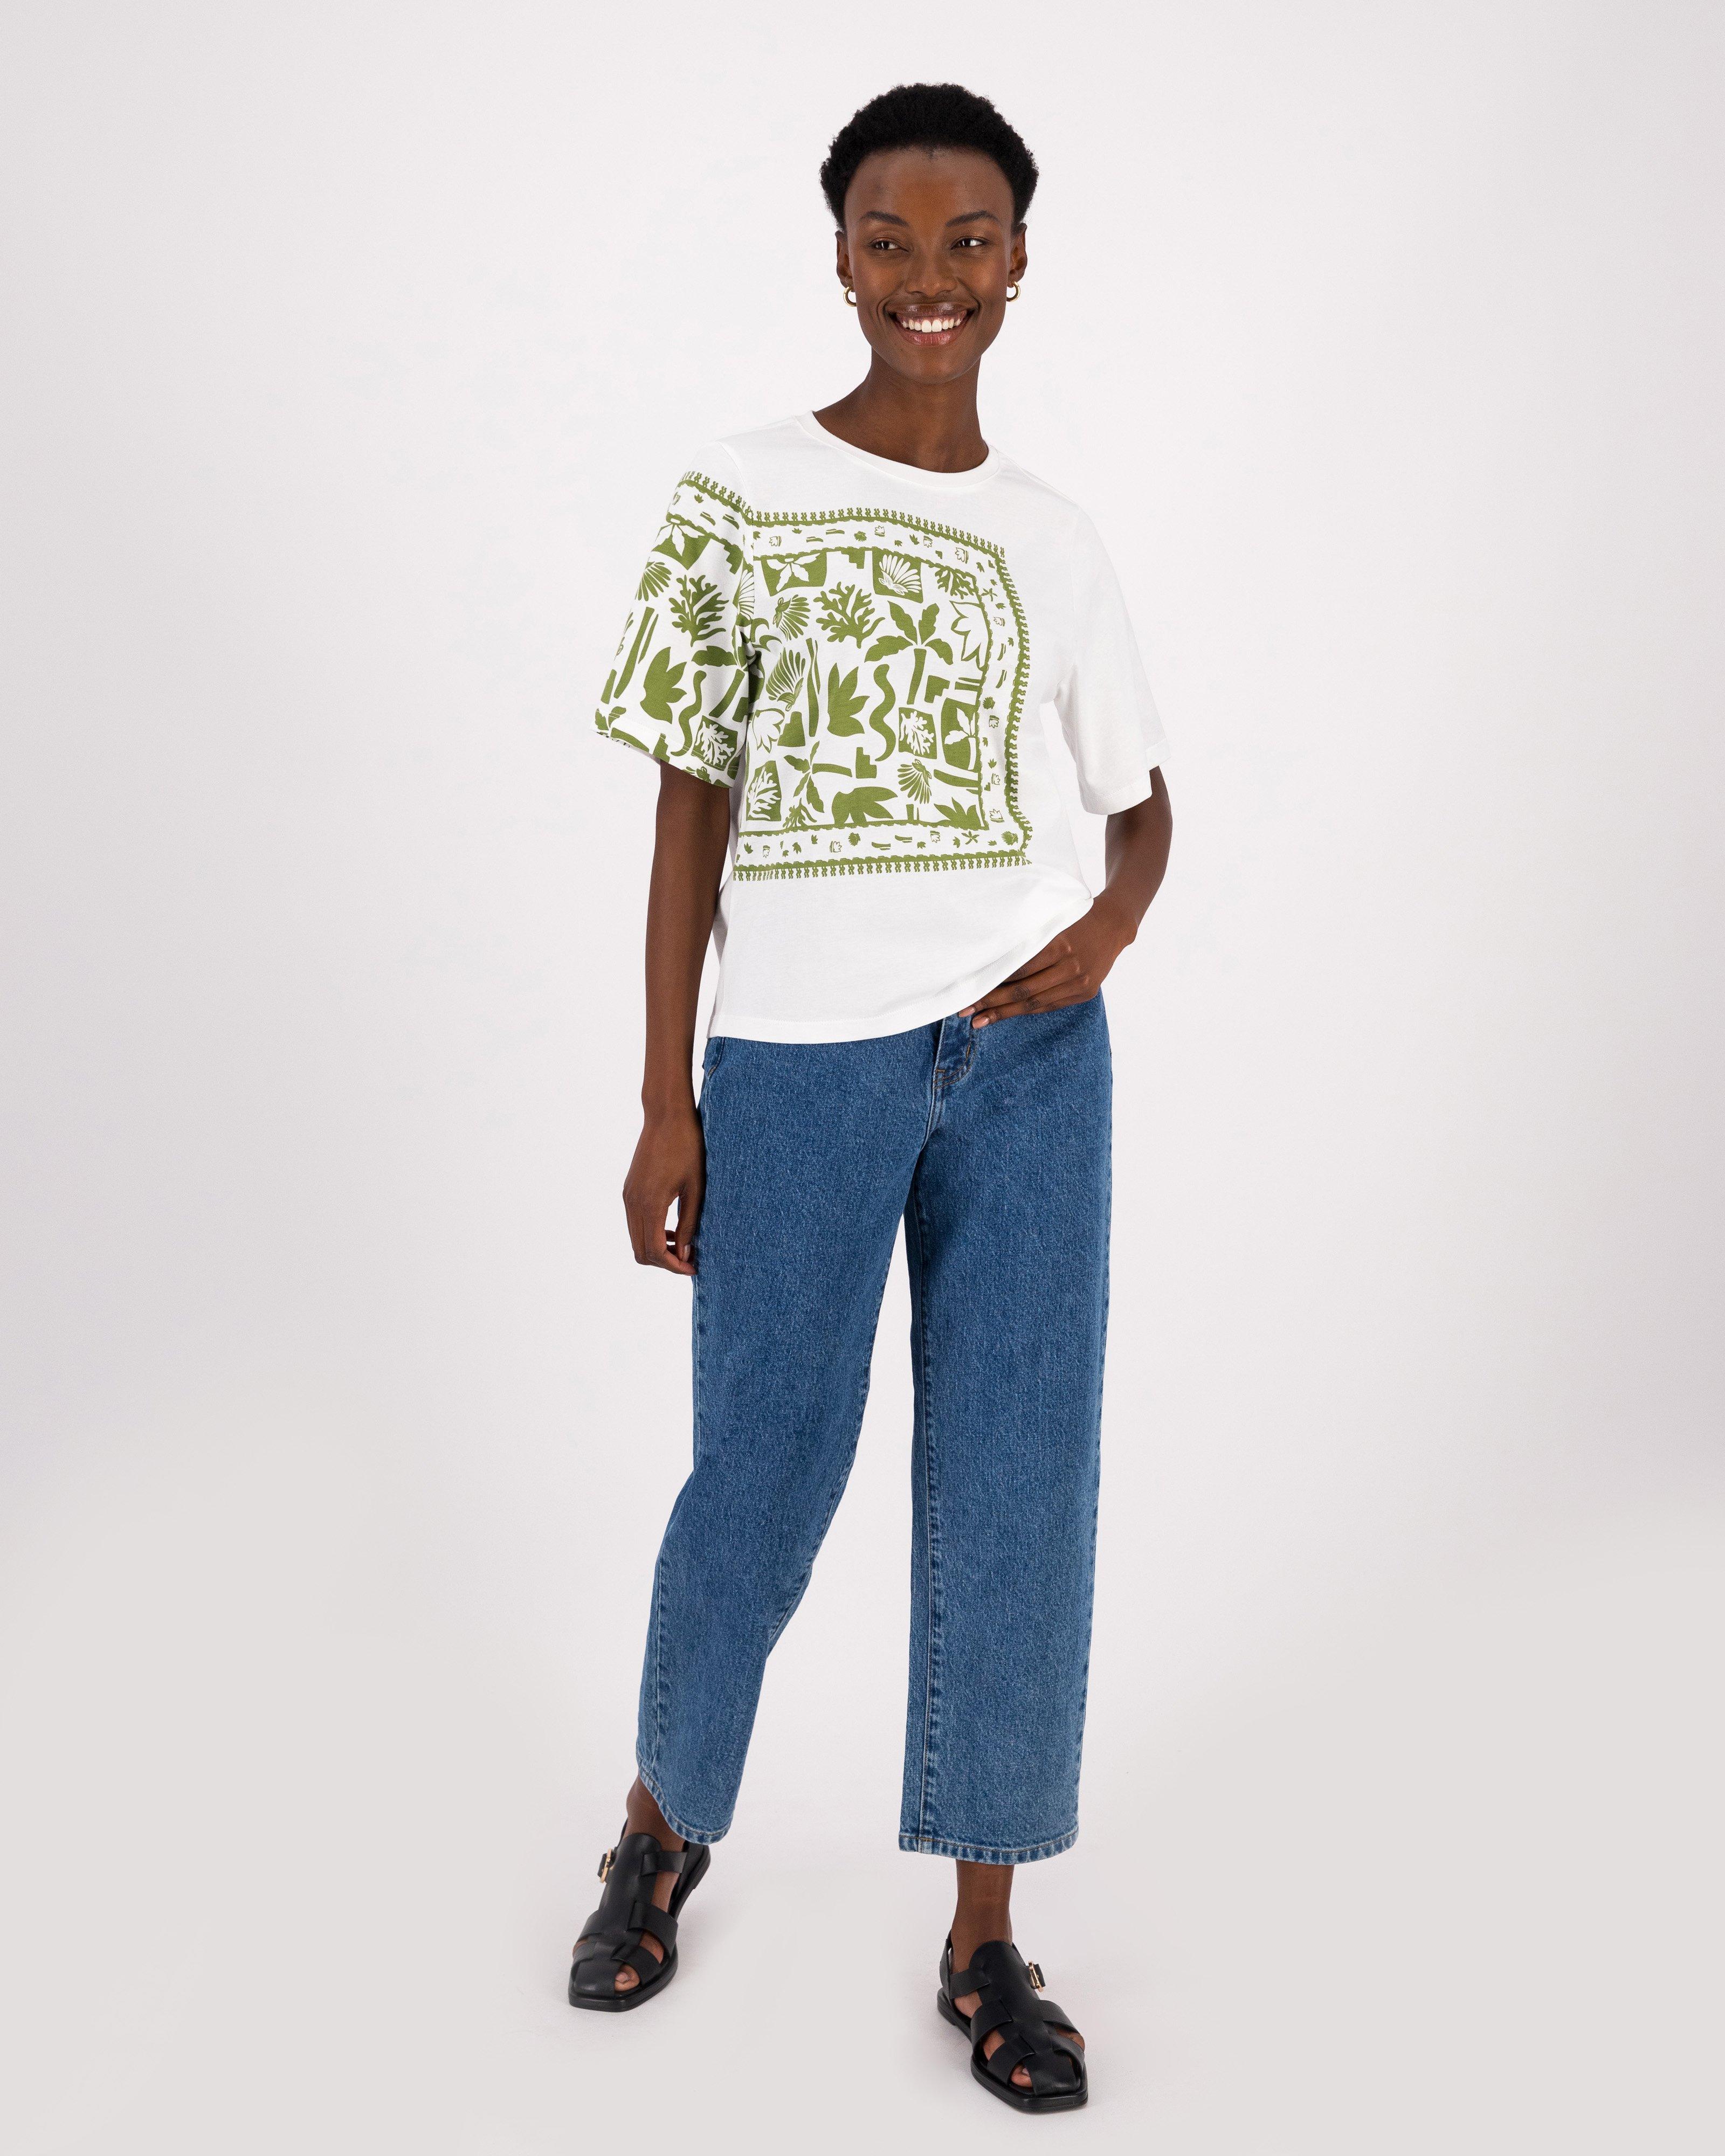 Leila Placement Printed Tee -  Olive